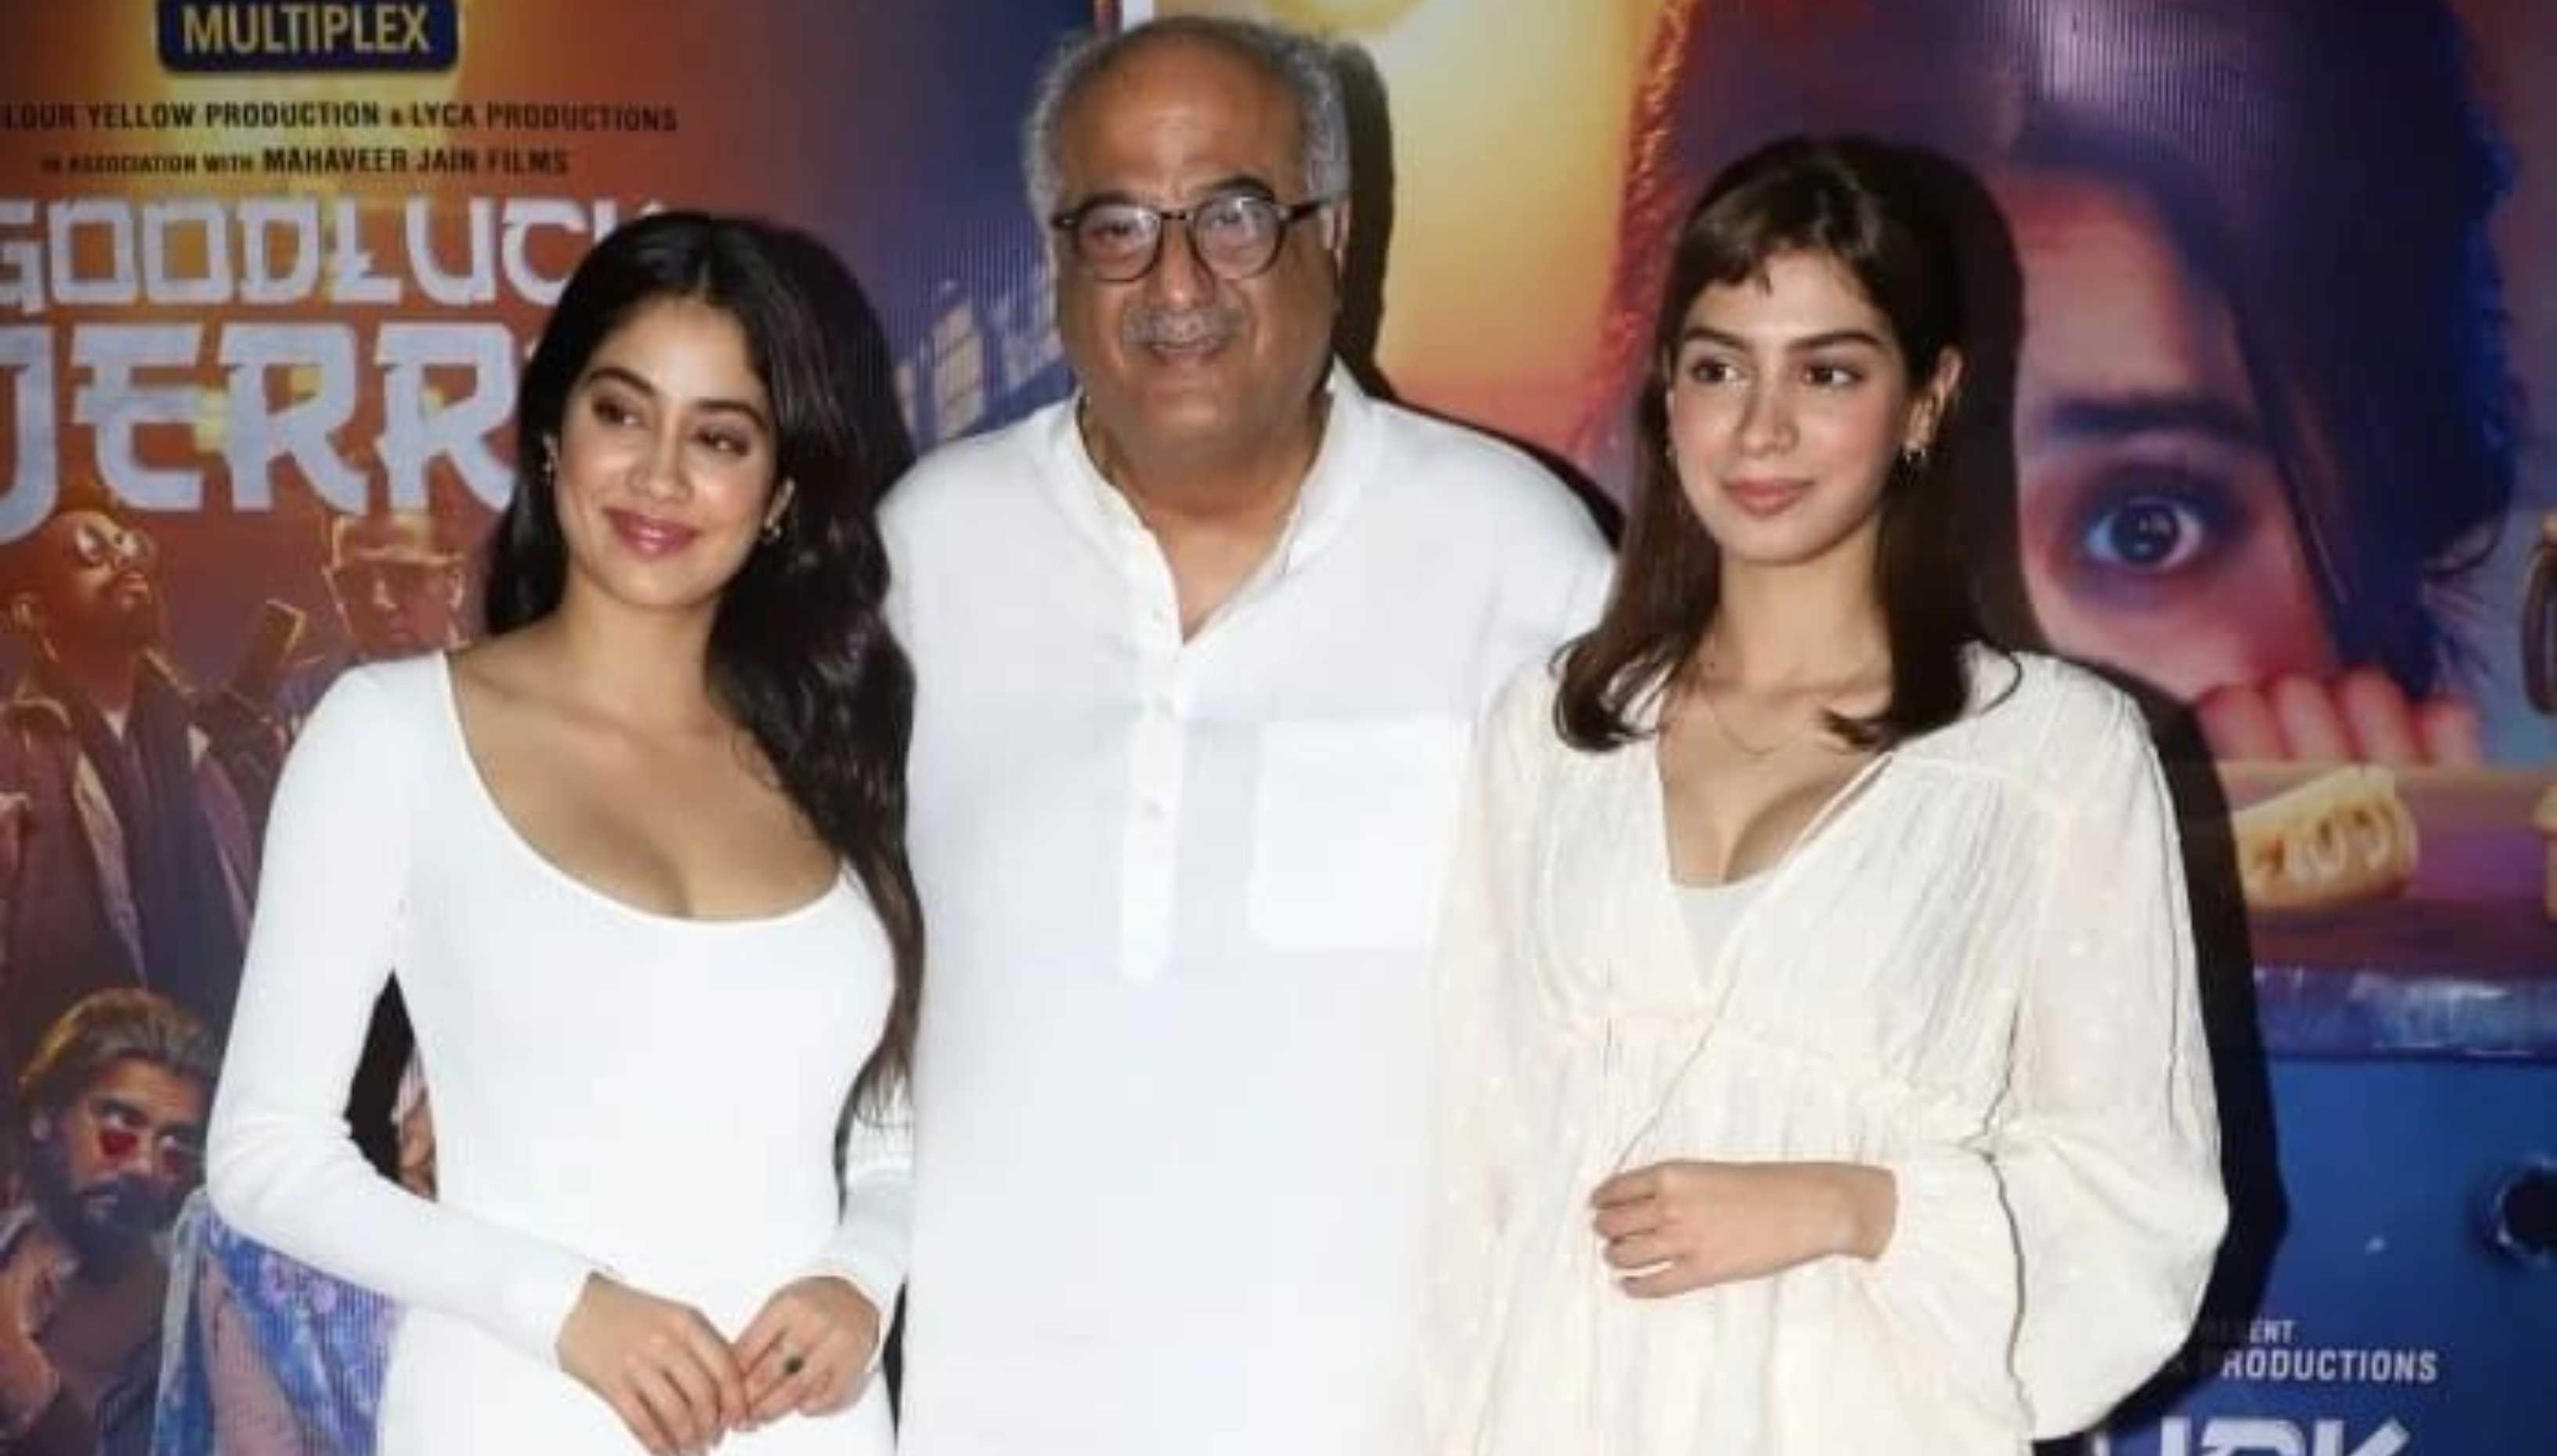 Janhvi shares her excitement about Boney Kapoor’s acting debut with Ranbir’s next; calls sister Khushi ‘so pure’